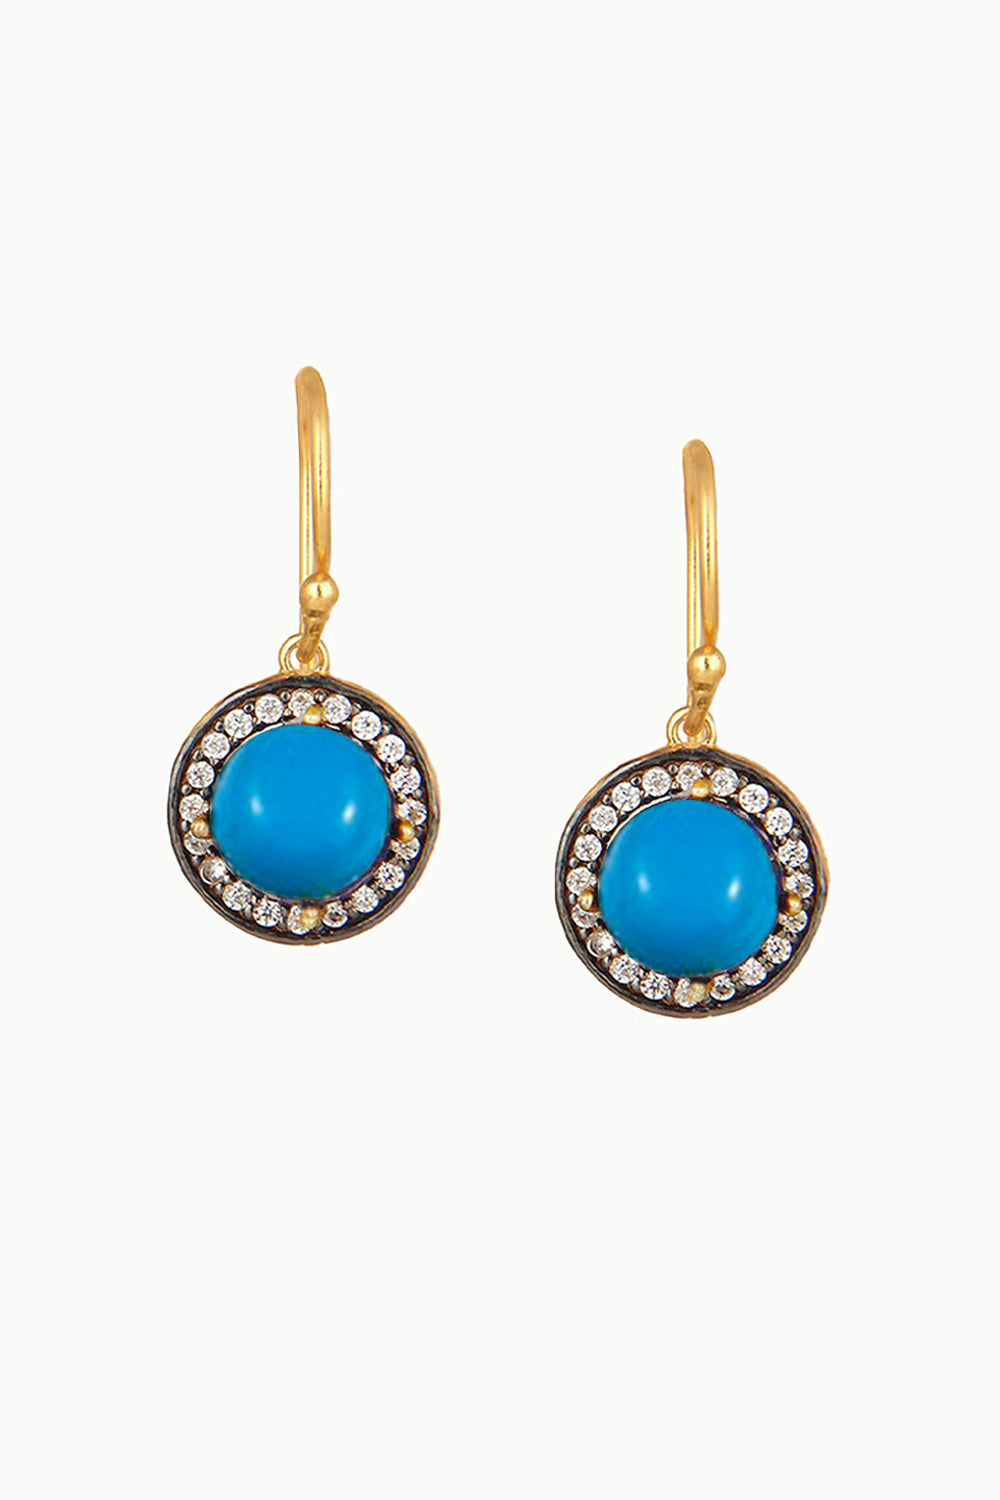 Turquoise Gold Vermeil Earrings - Halo